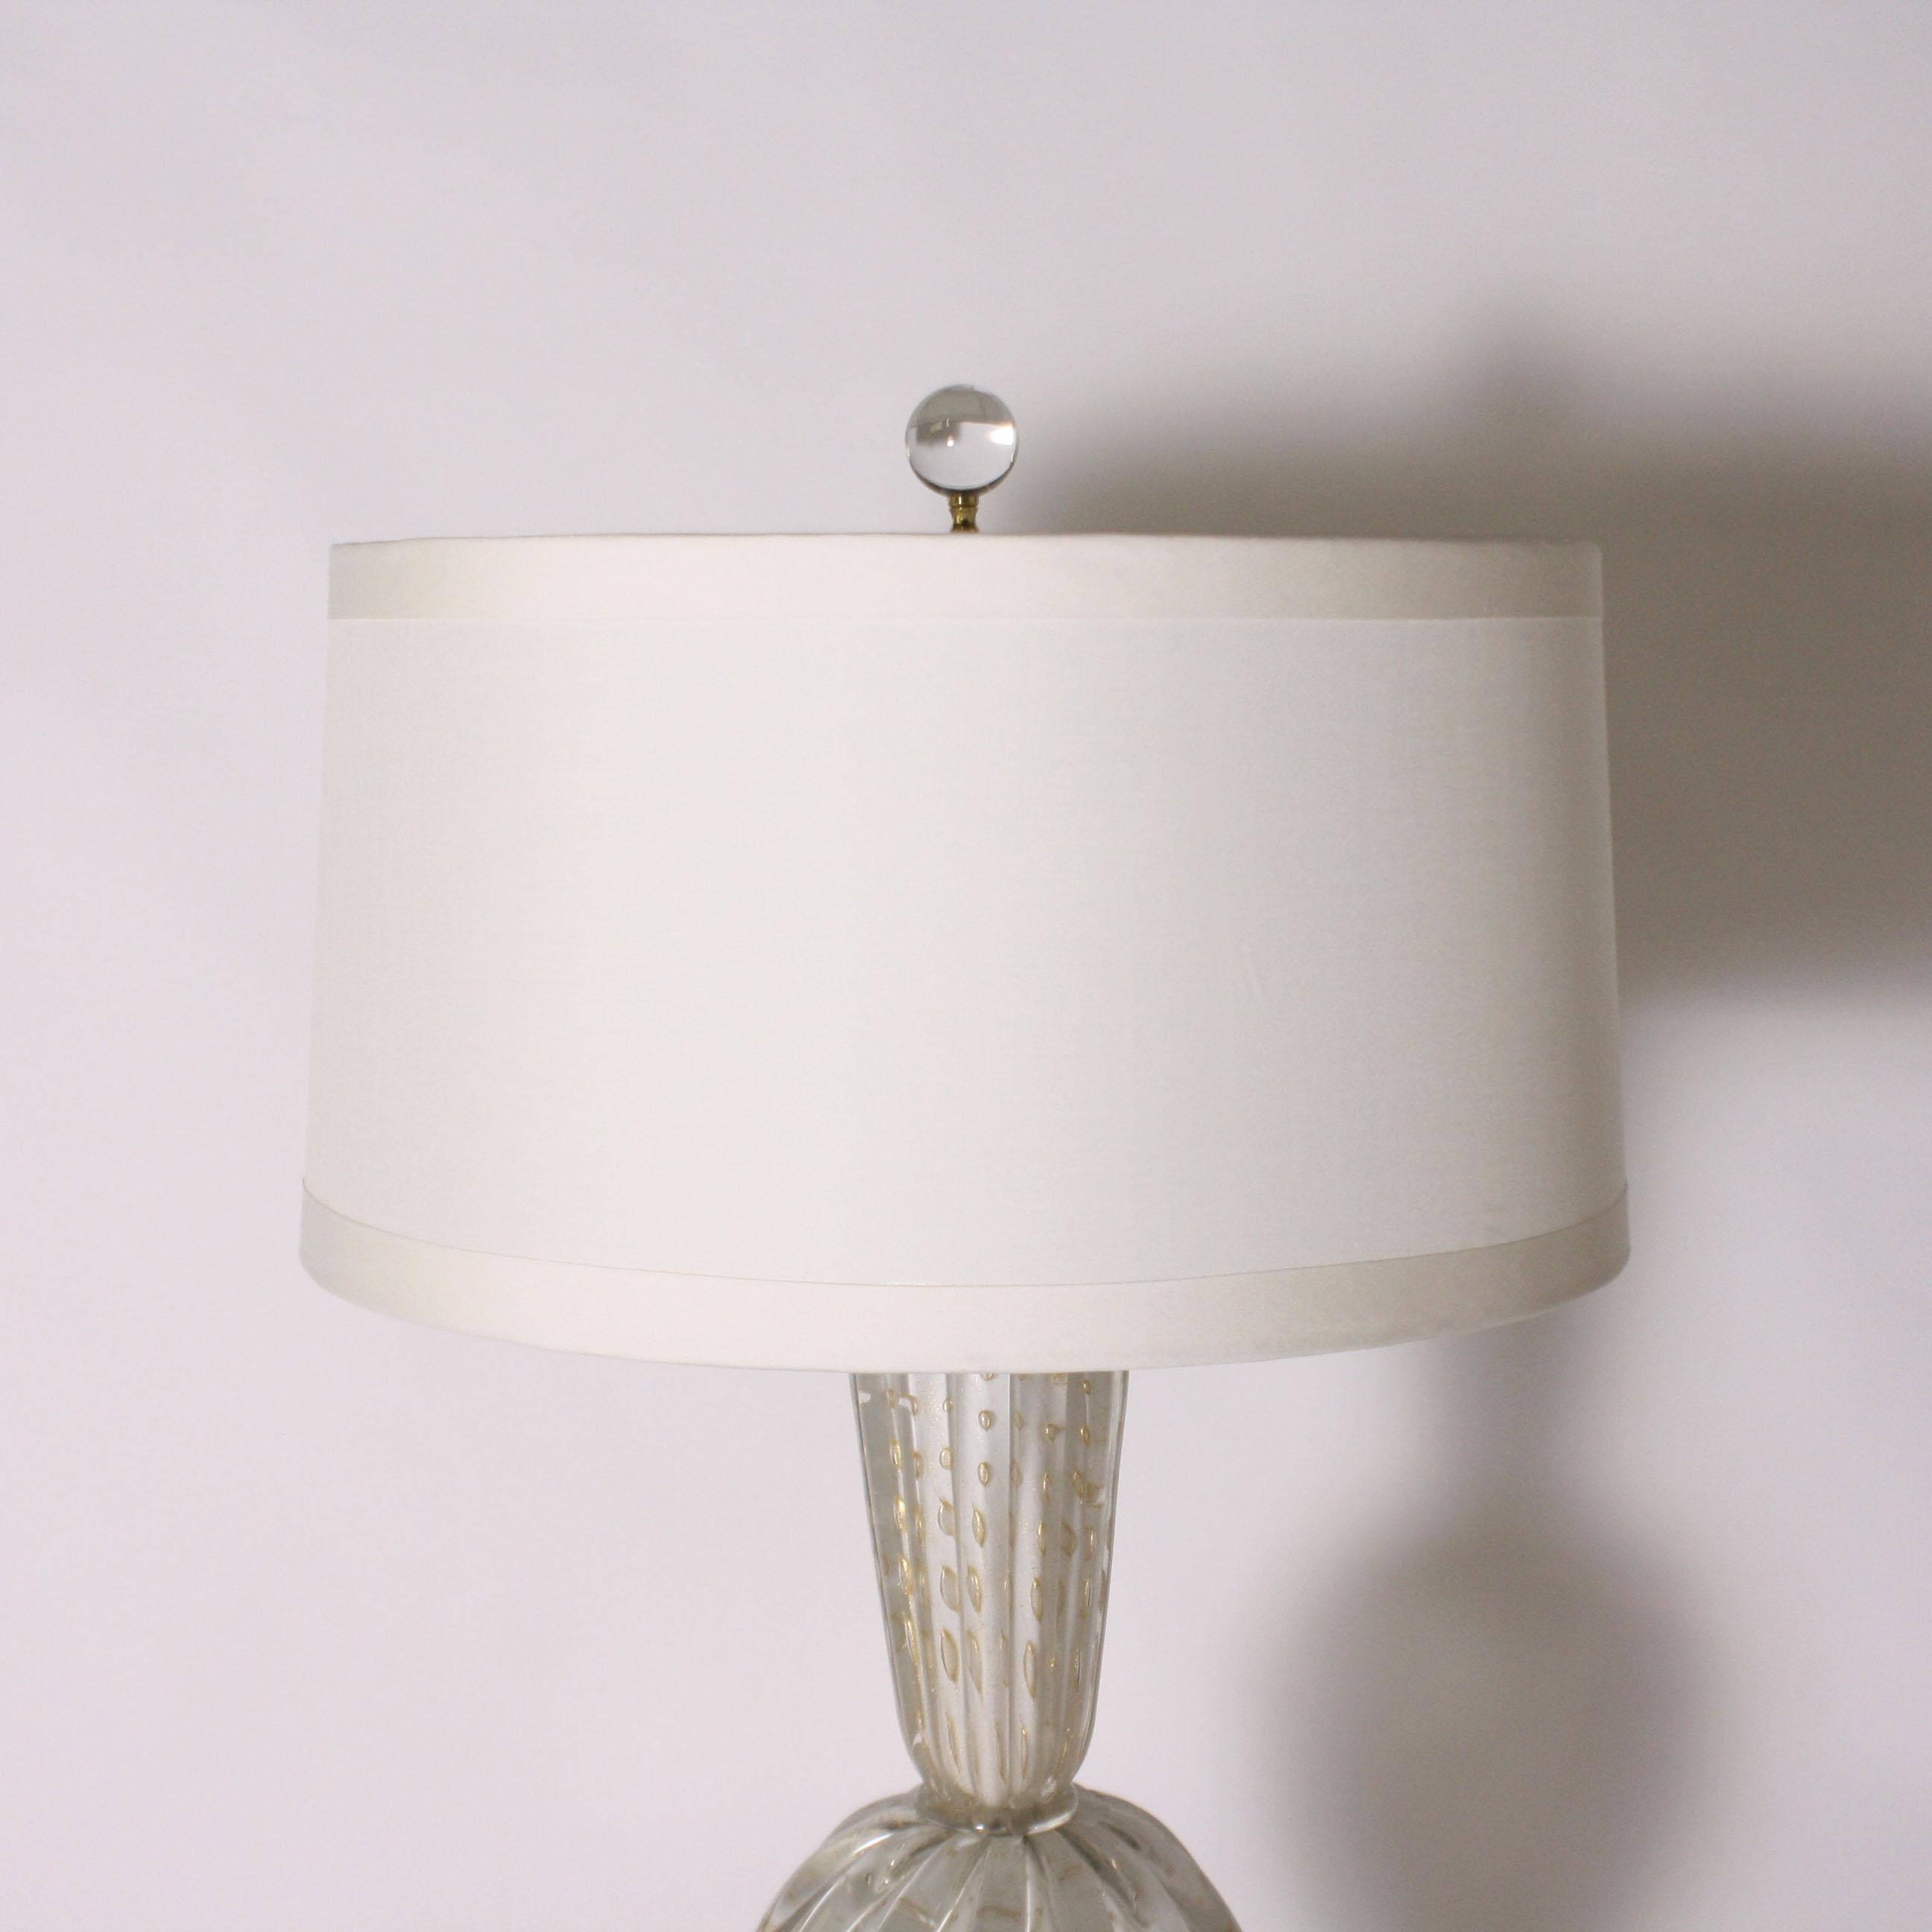 Barovier & Toso ivory lamp with gold inclusions, circa 1950.